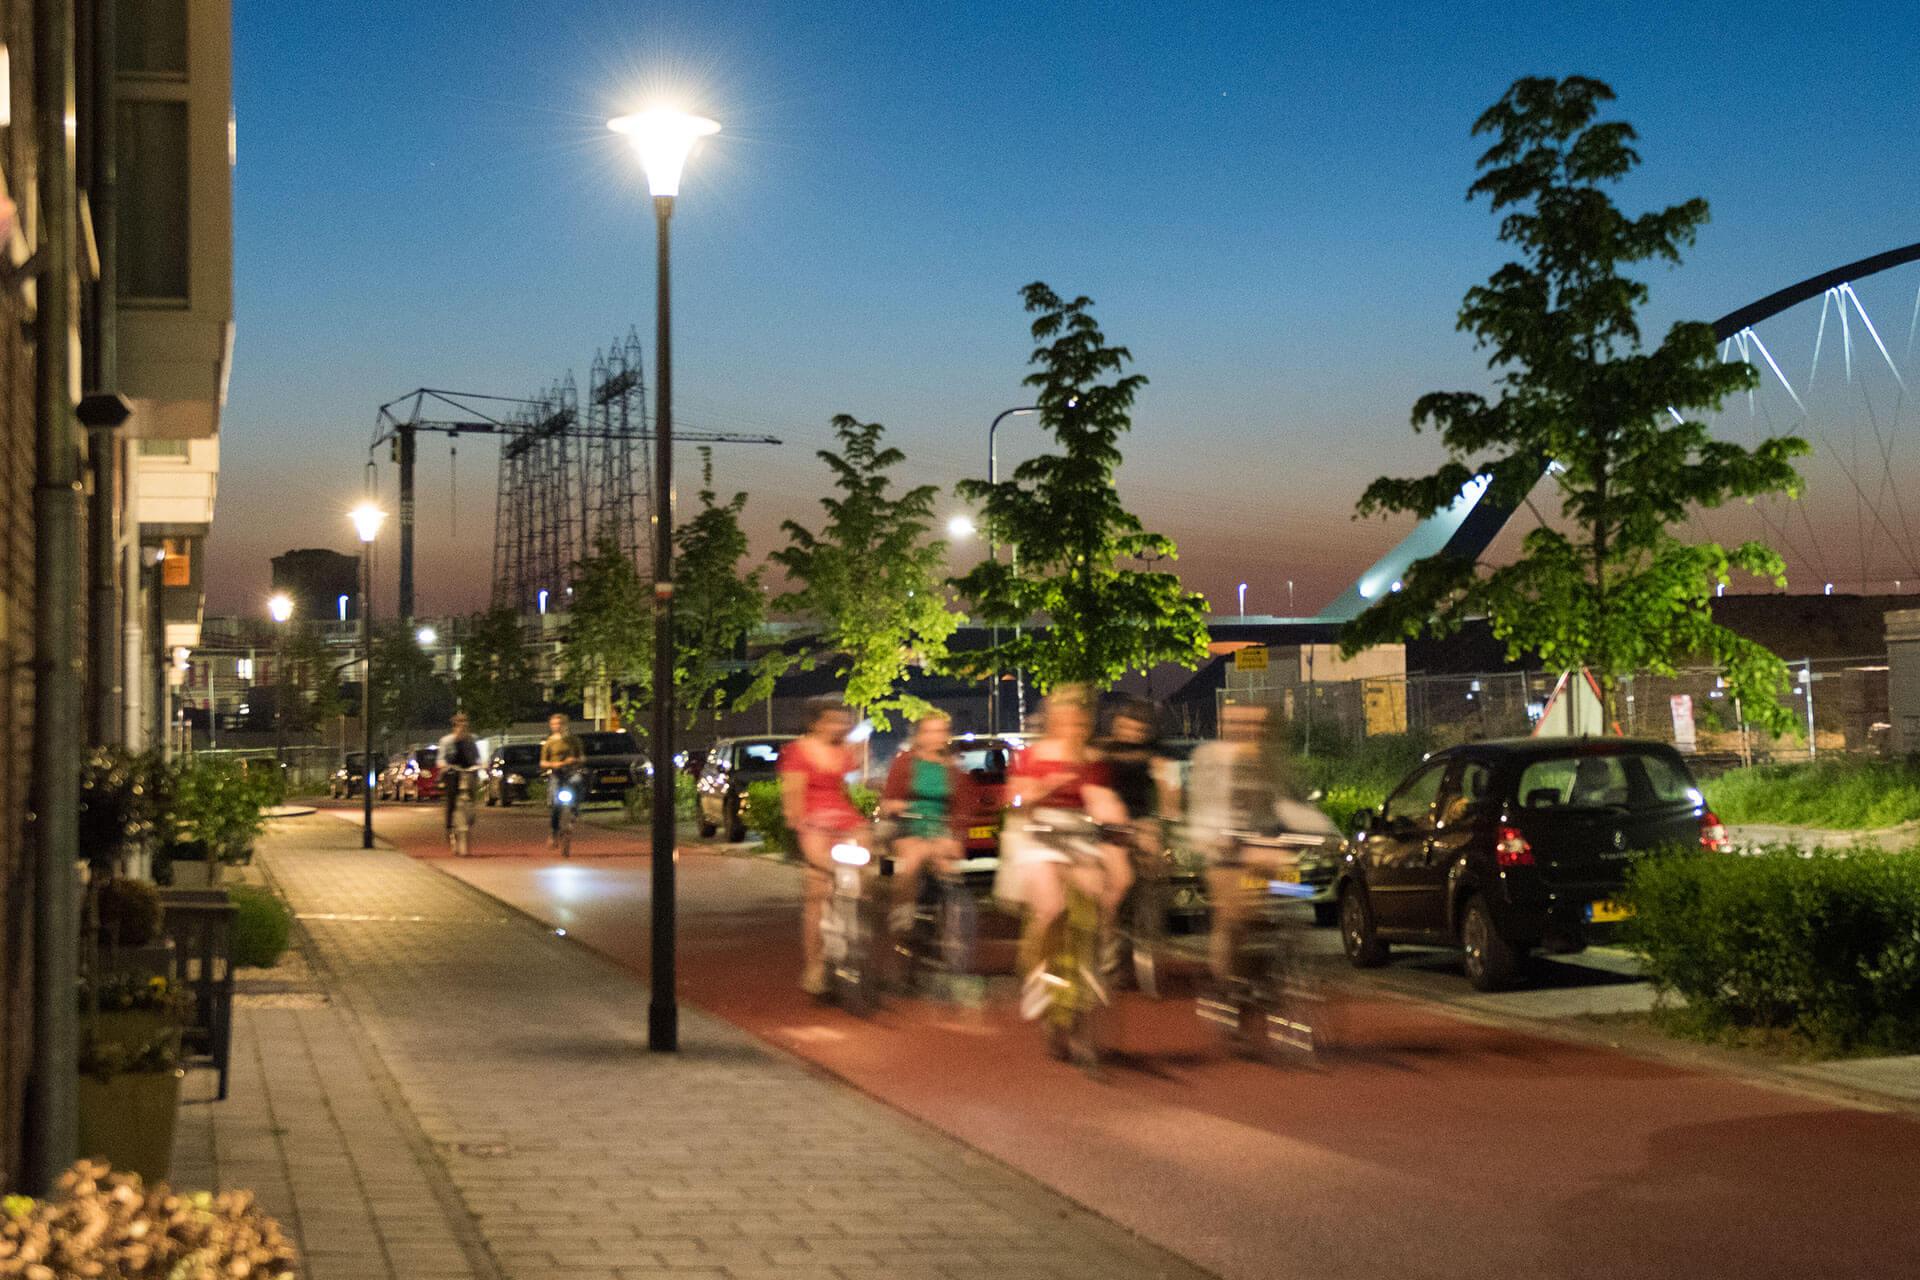 Energy efficient Pilzeo luminaire not only lights Koningsdaal but also enhances the nocturnal landscape